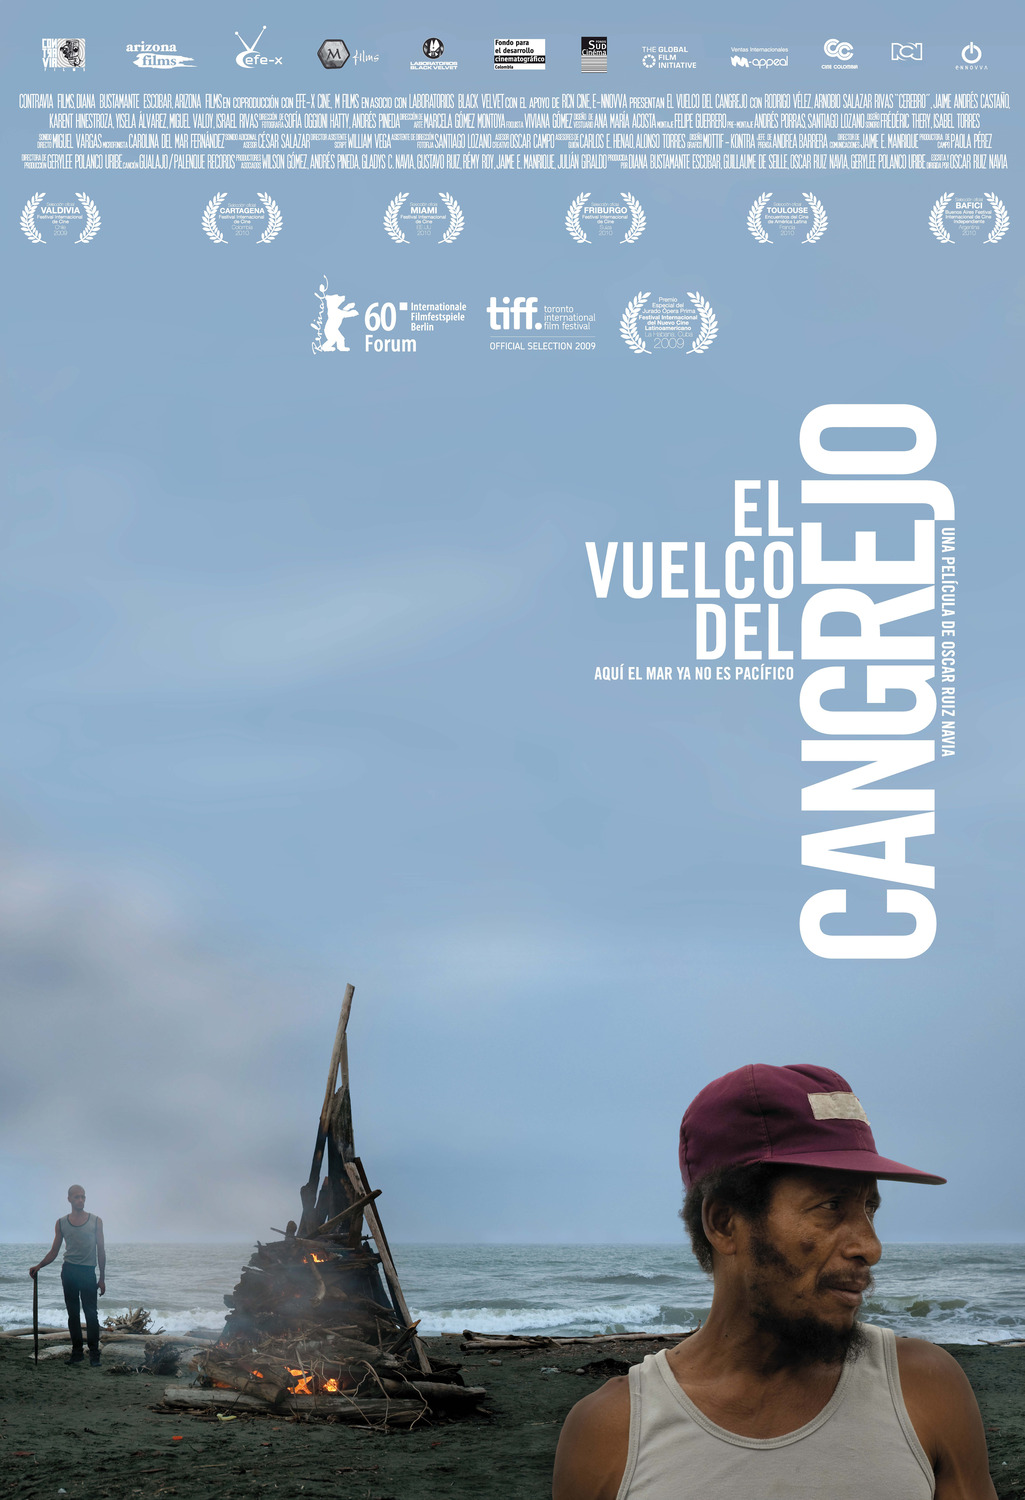 Extra Large Movie Poster Image for El vuelco del cangrejo 